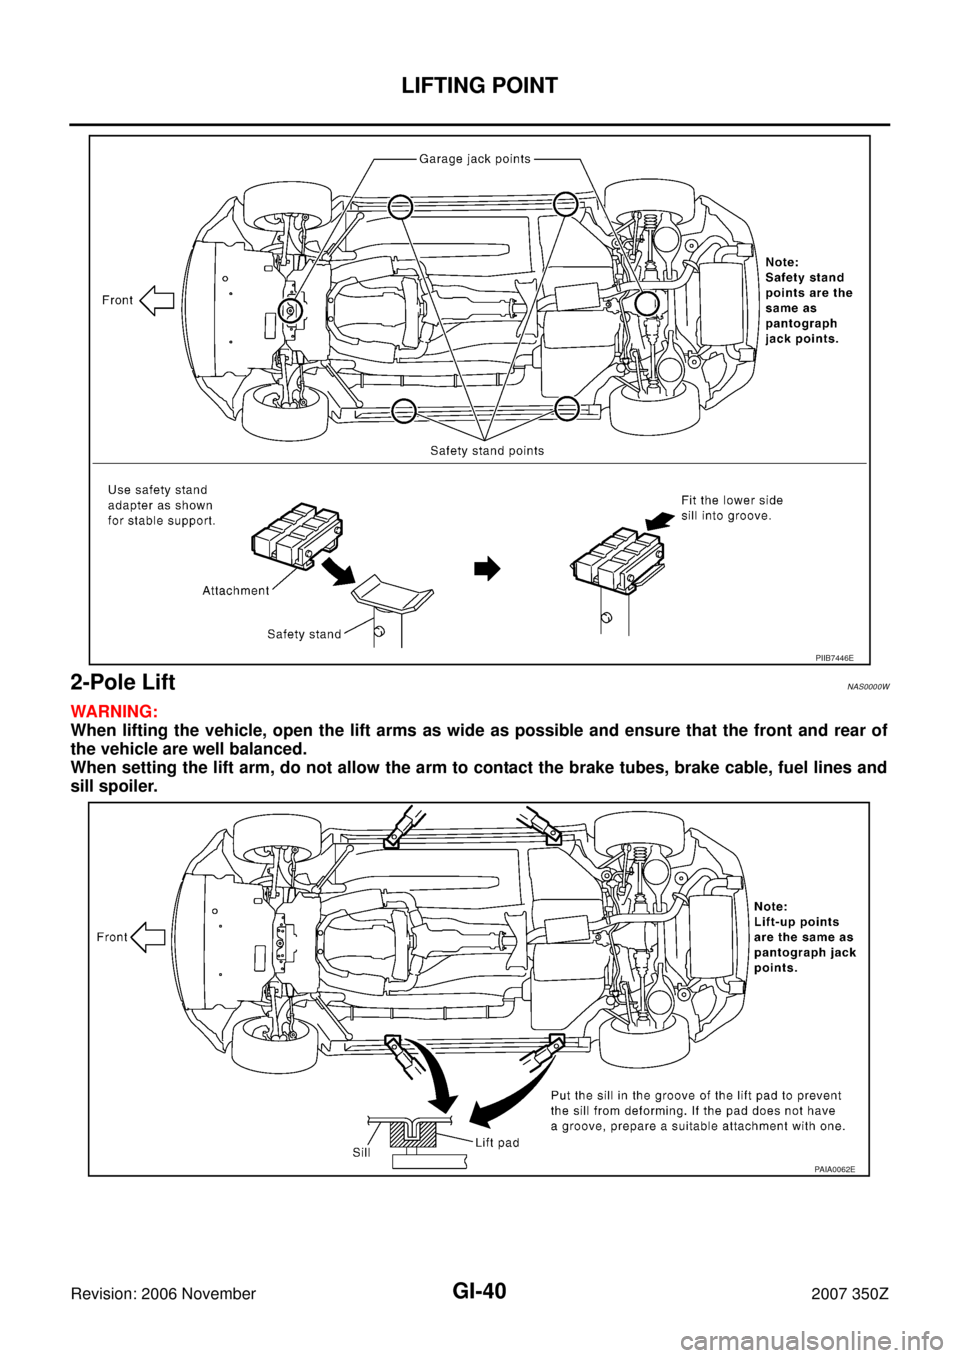 NISSAN 350Z 2007 Z33 General Information Owners Guide GI-40
LIFTING POINT
Revision: 2006 November2007 350Z
2-Pole Lift NAS0000W
WARNING:
When lifting the vehicle, open the lift arms as wide as possible and ensure that the front and rear of
the vehicle ar